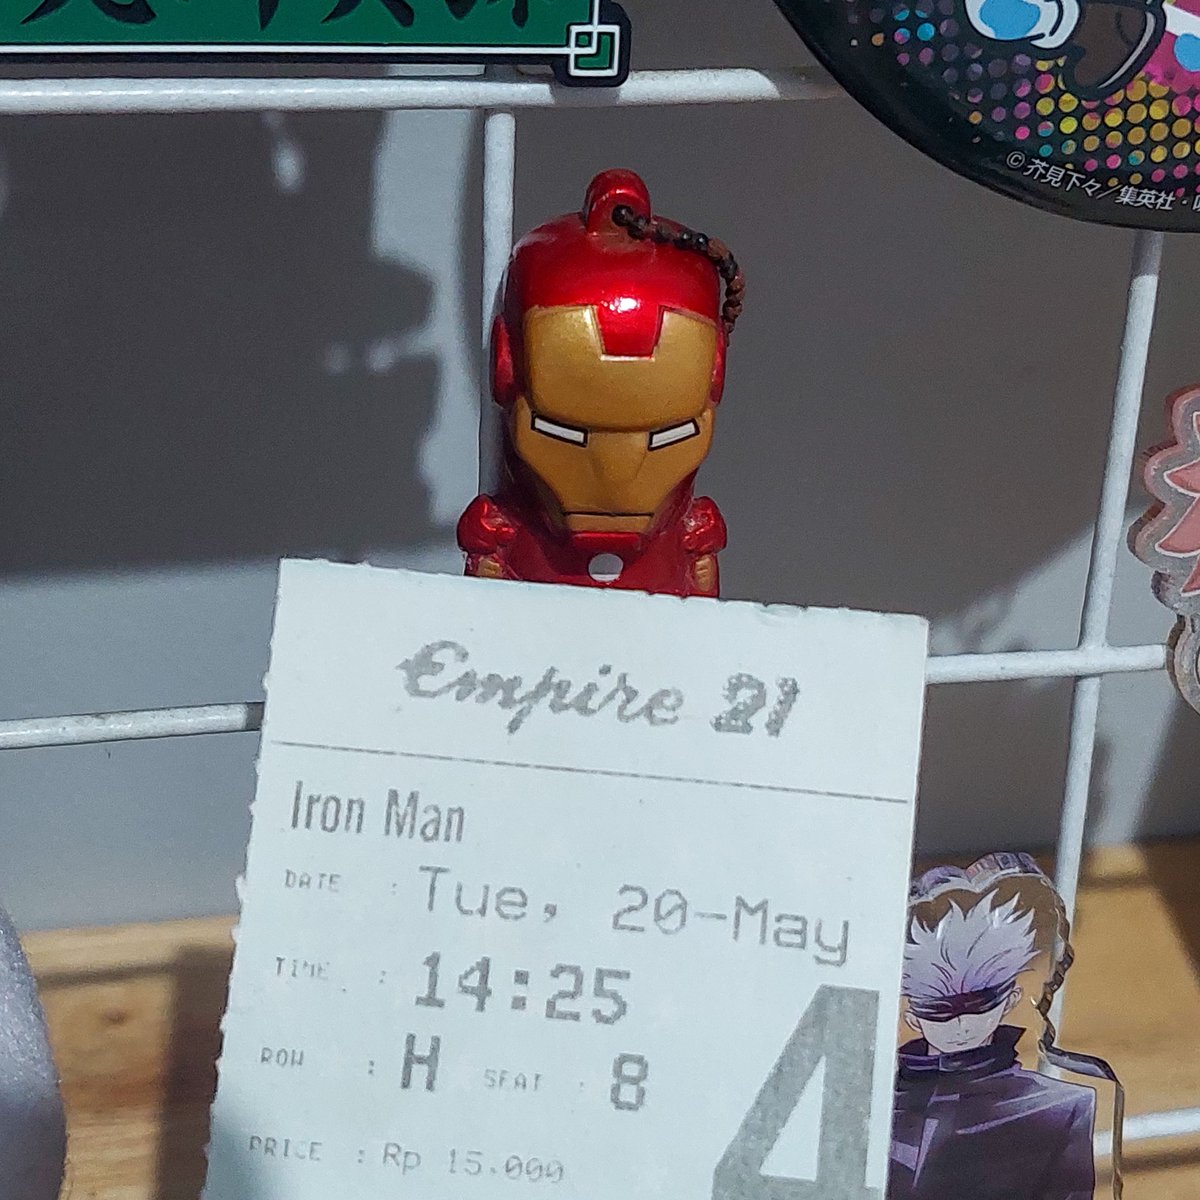 marv! It's been so long since the last time I saw you, Mr. Stark.